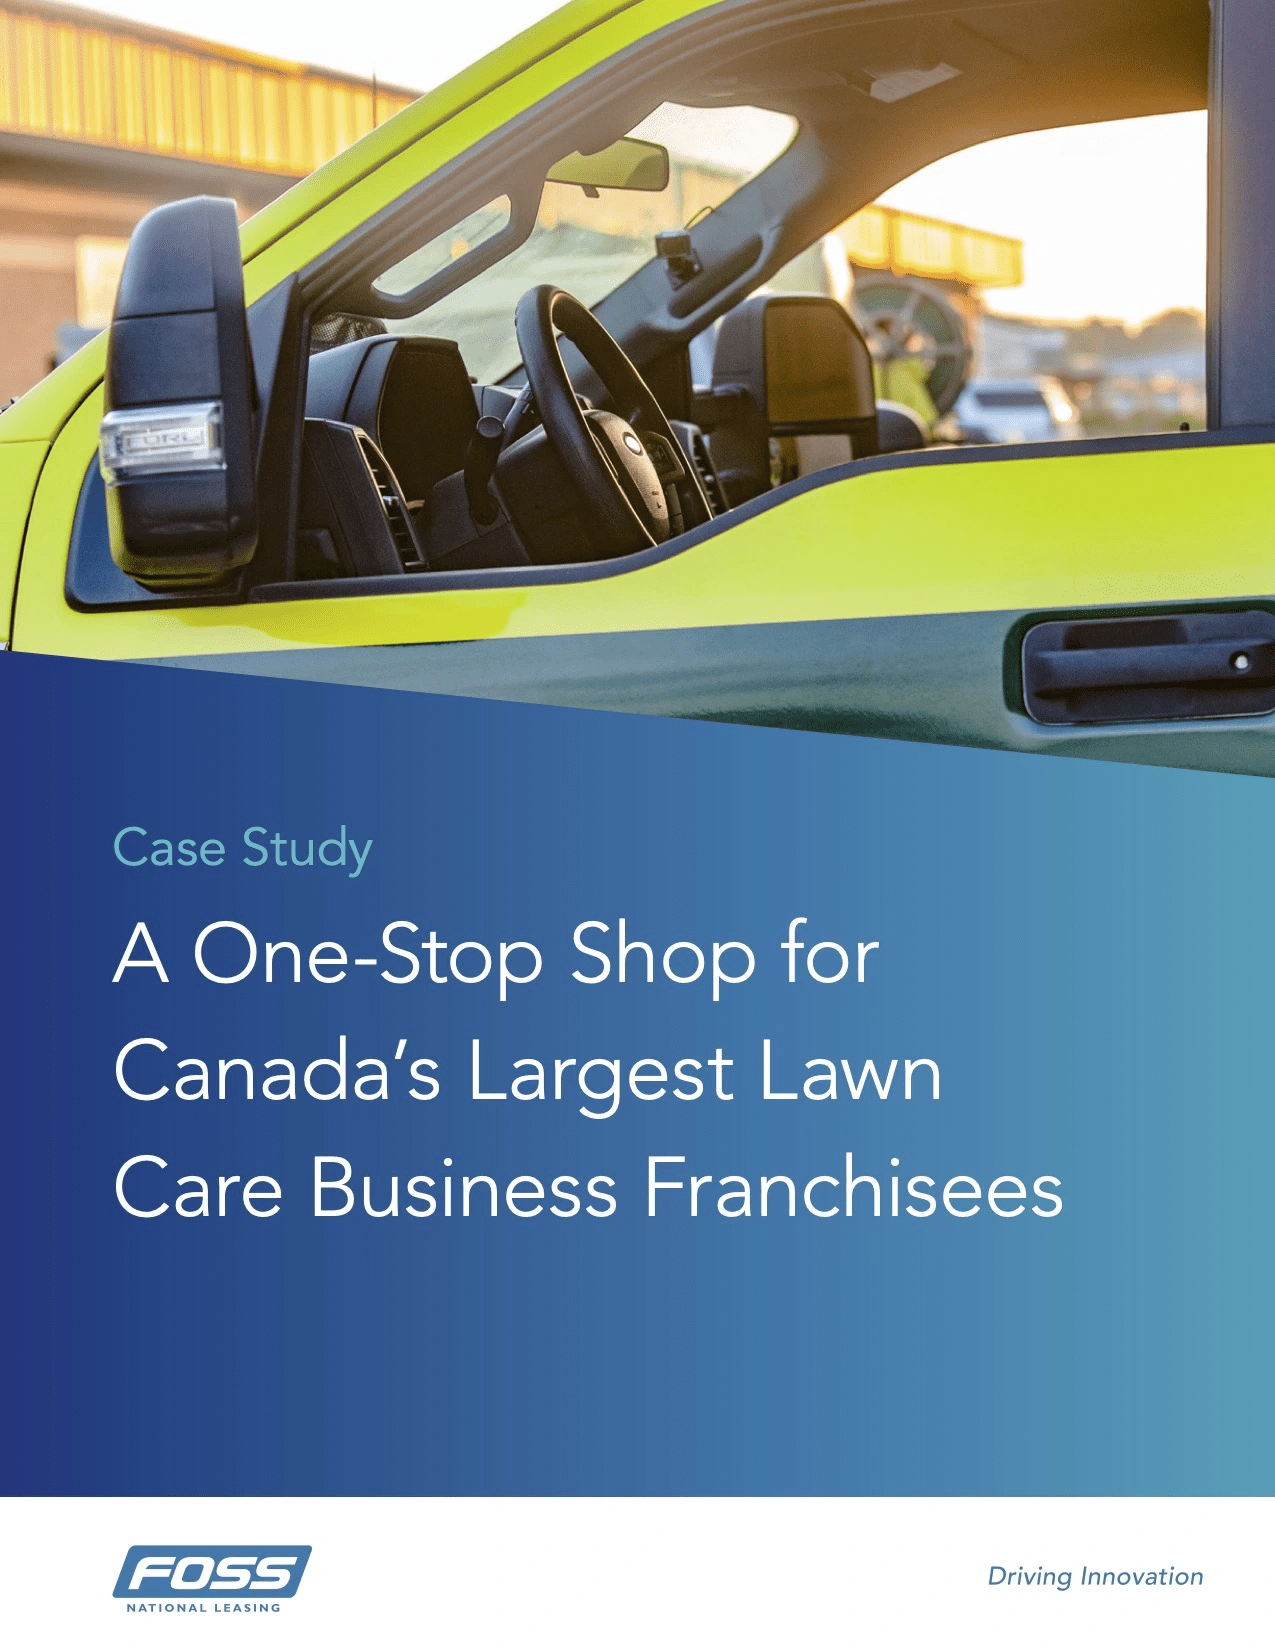 A One-Stop Shop for Canada’s Largest Lawn Care Business Franchisees